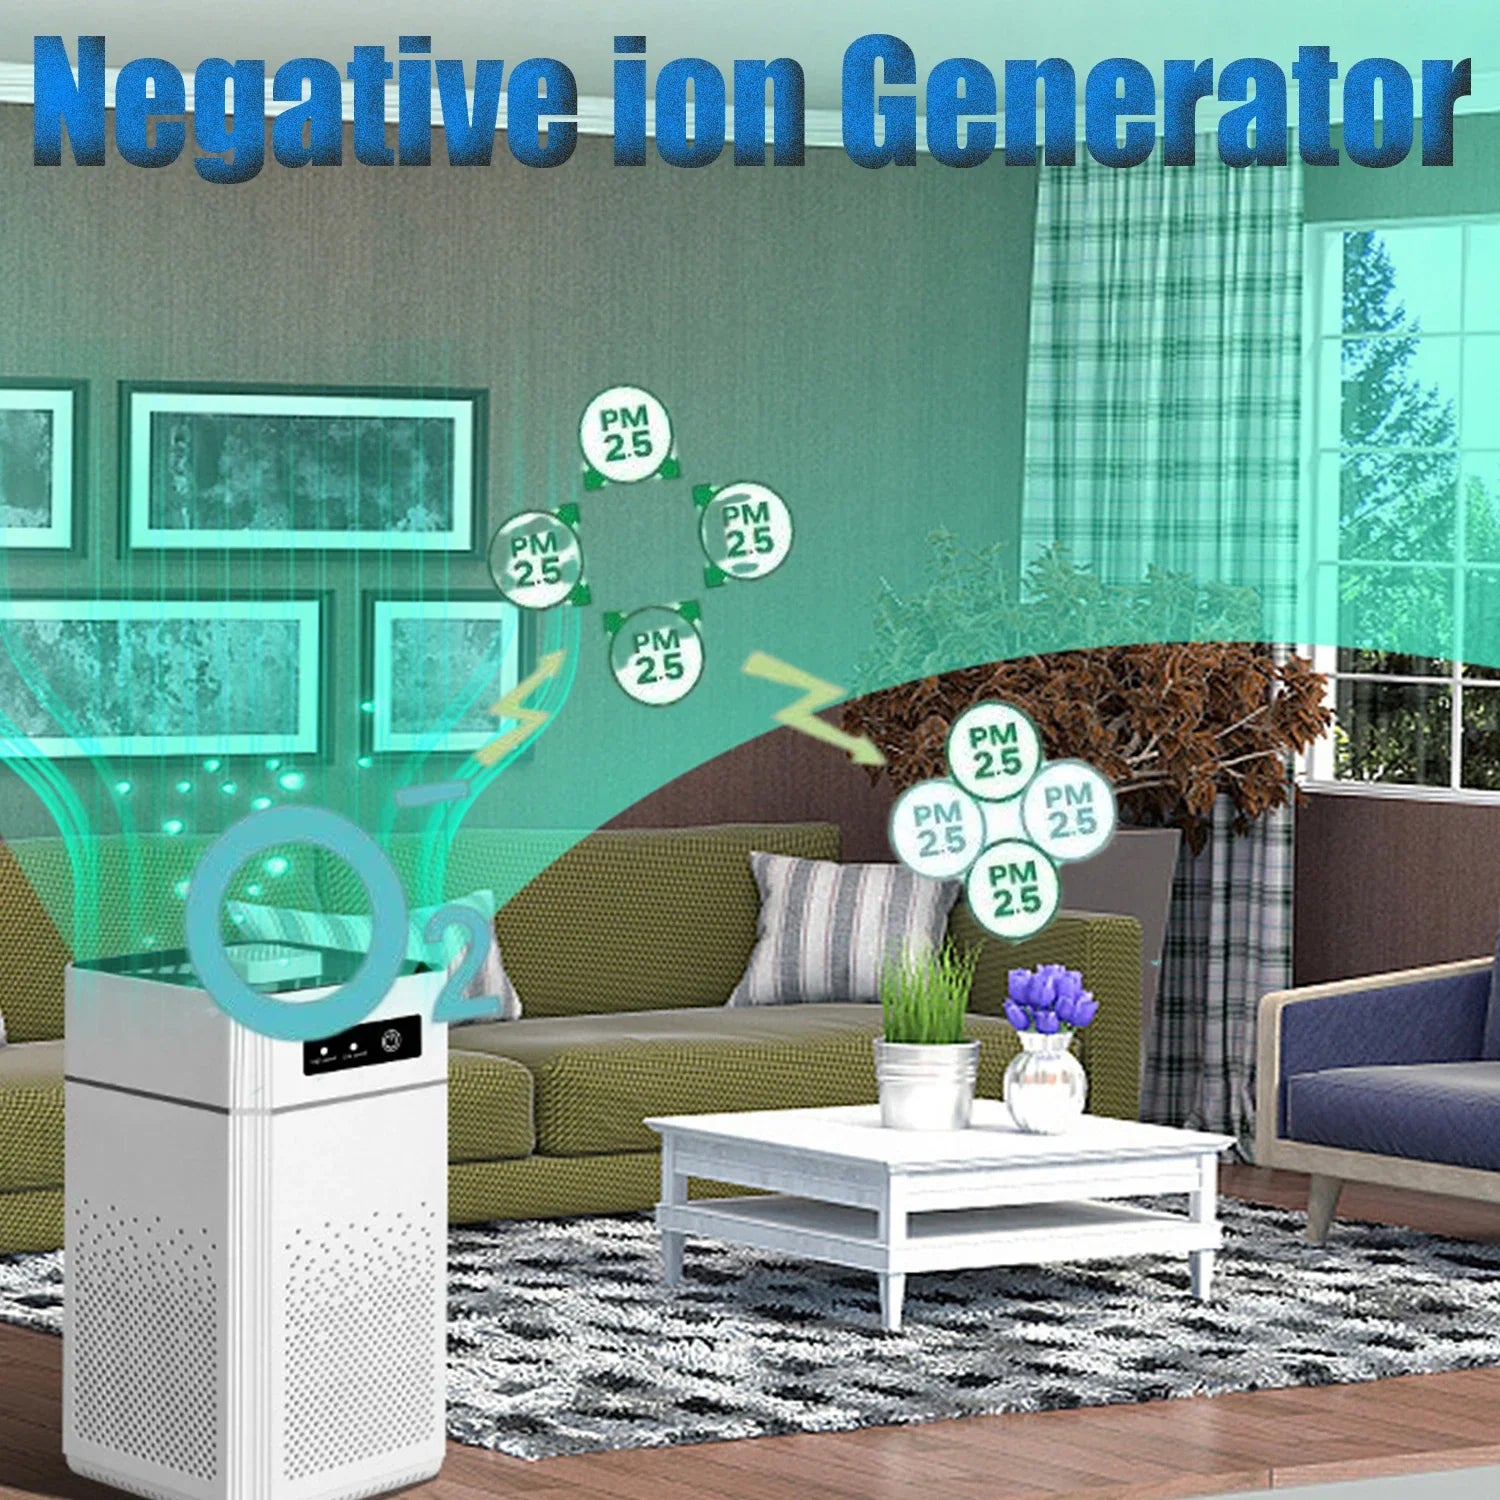 Air Purifier,Negative Ion Generator,Harmful Smoke Dust Remover,HEPA  Activated Carbon Nano Sterilization Filter for Home Bedroom